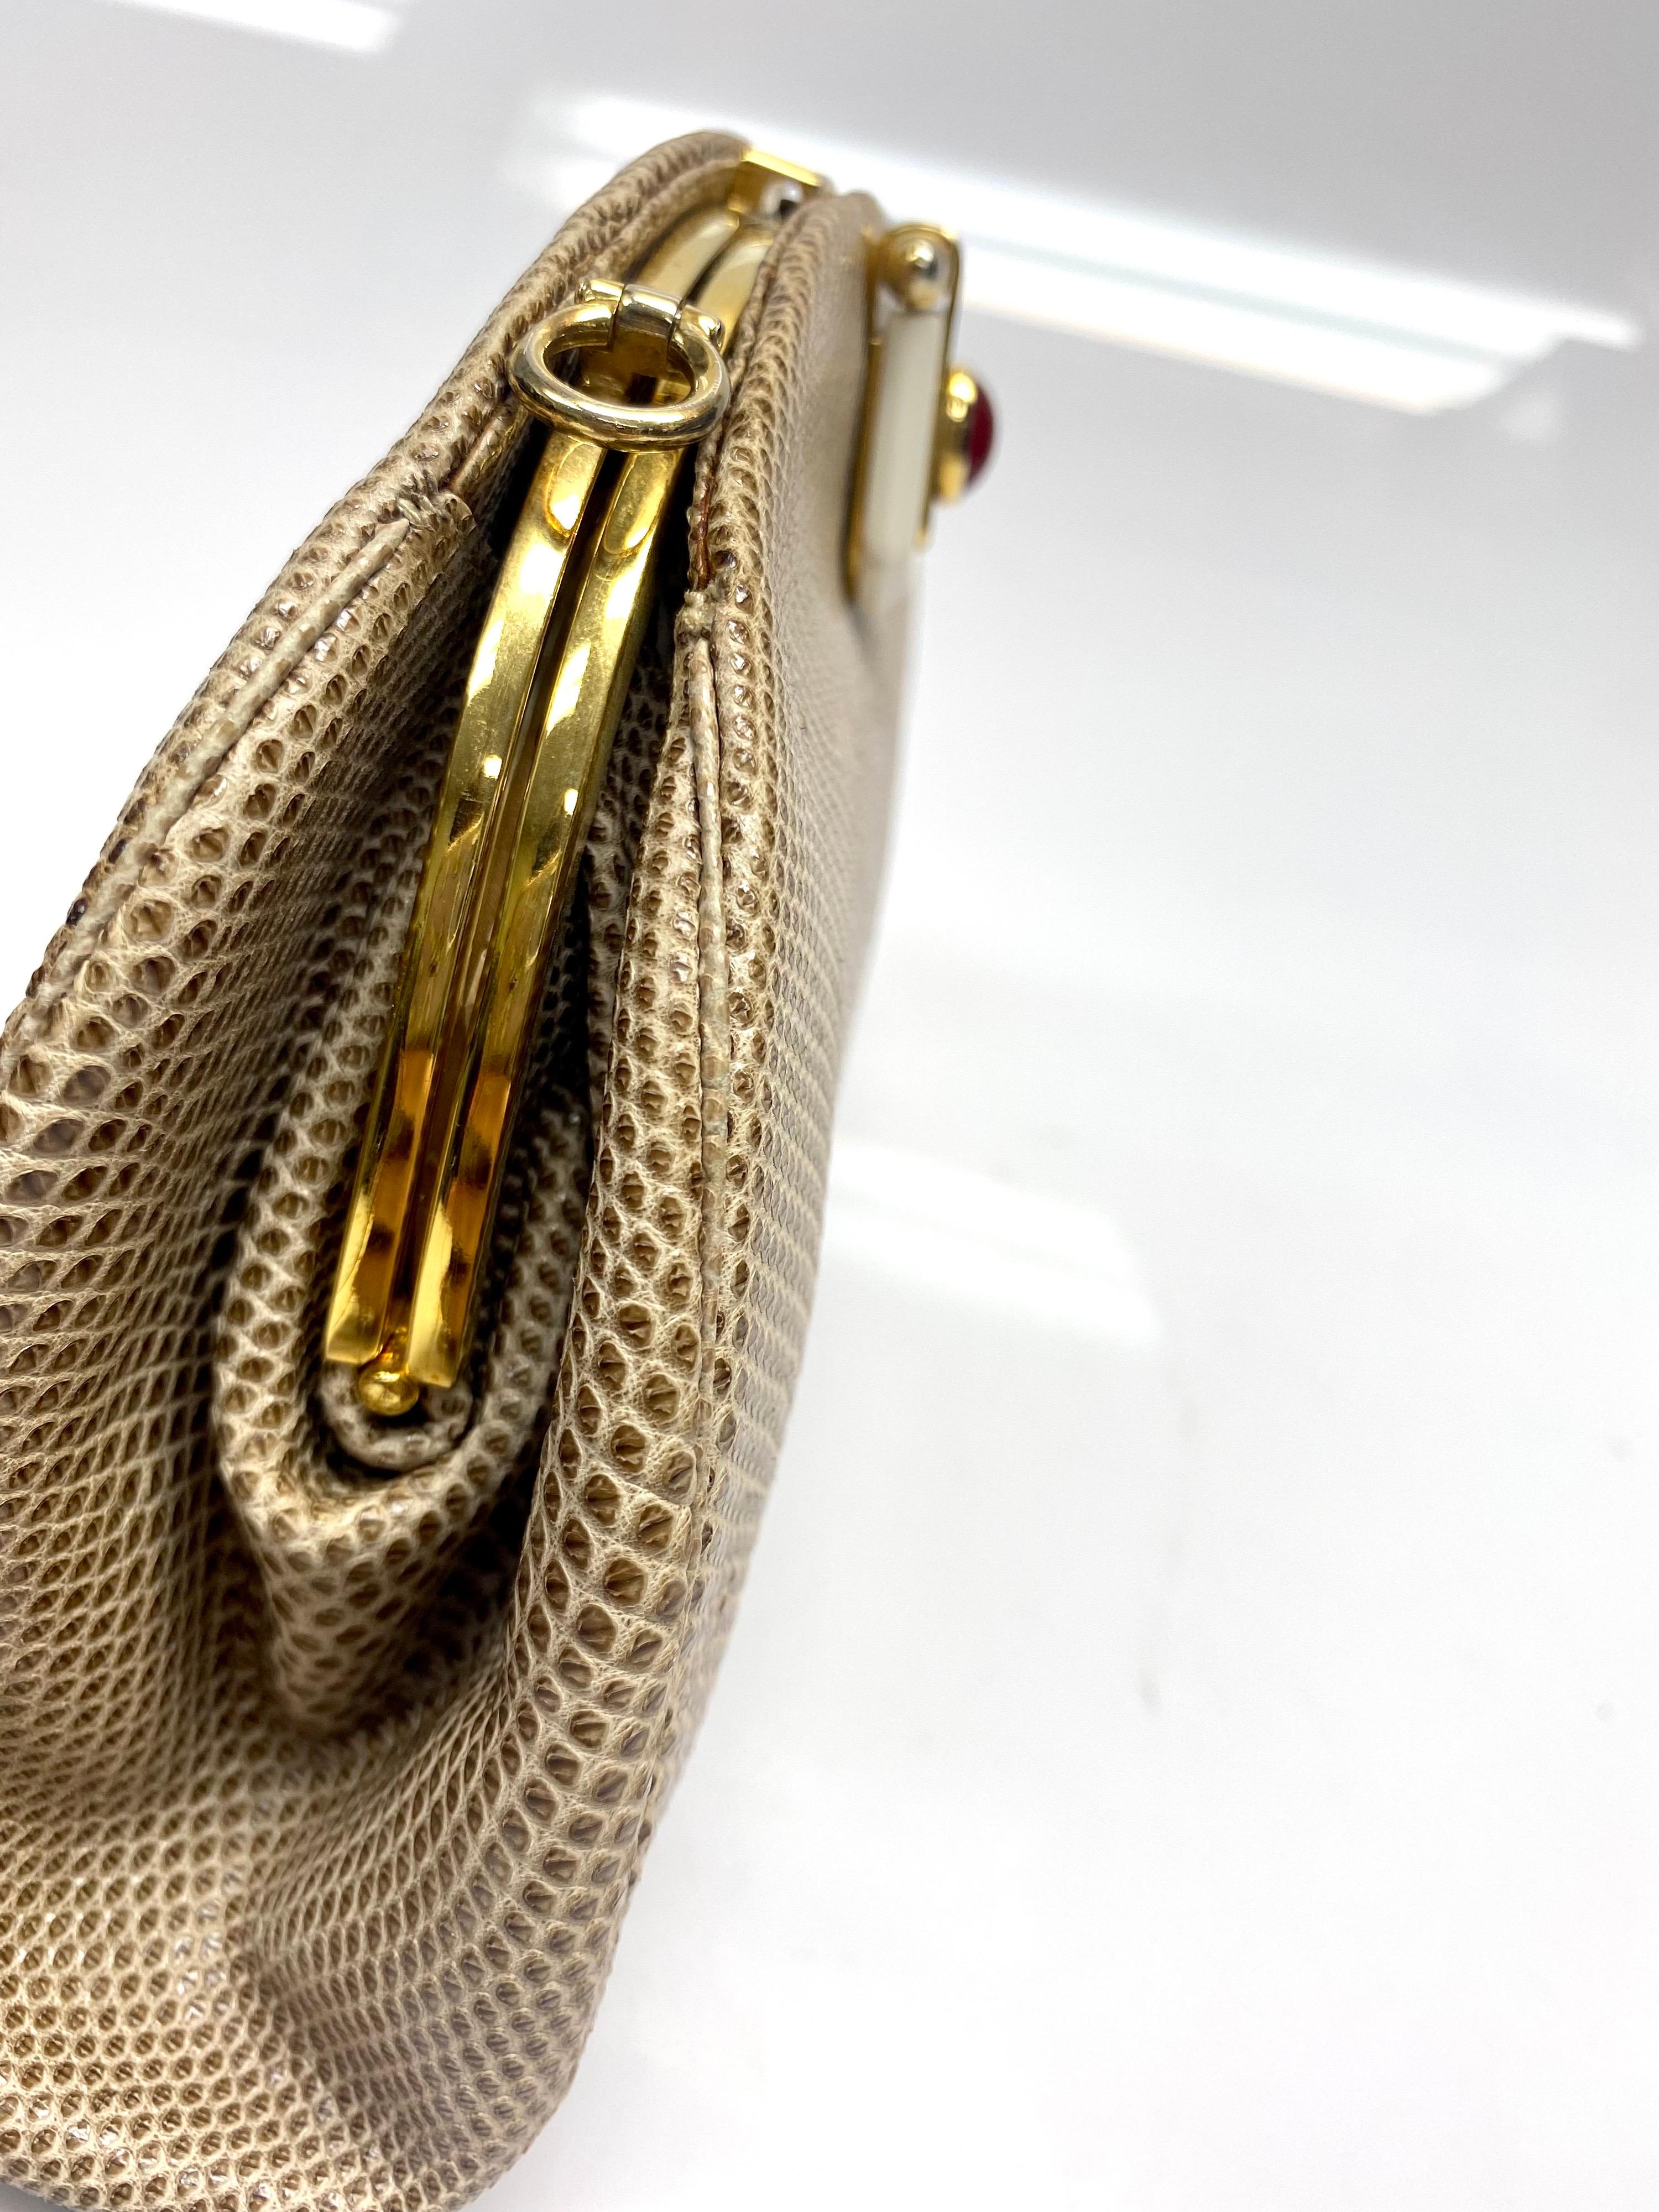 Brown Judith Leiber Tan Karung Snake Handbag with Stone Buckle Front.  For Sale